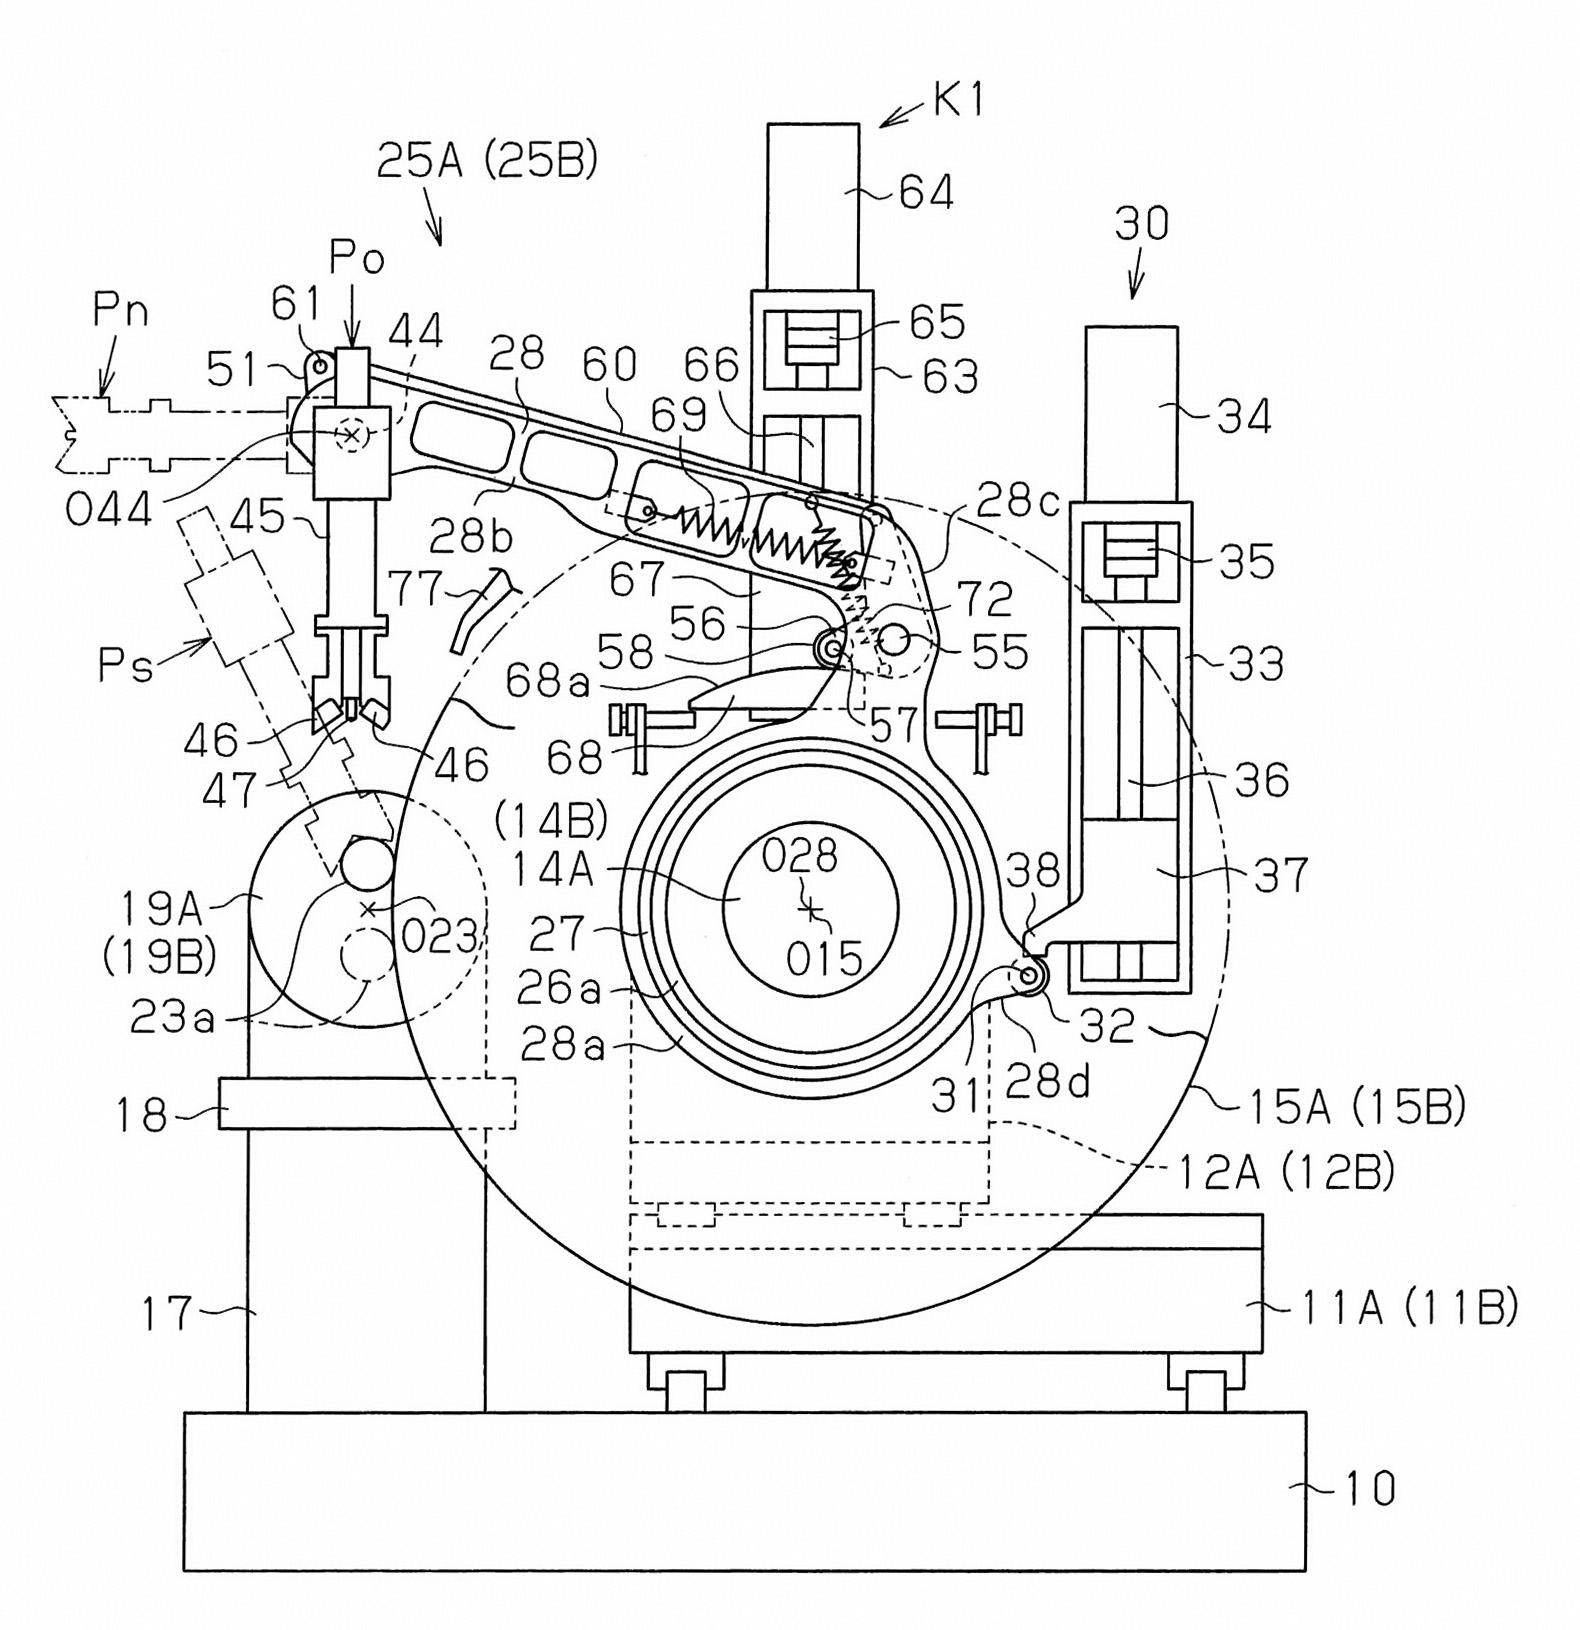 Grinding machine and measurement device